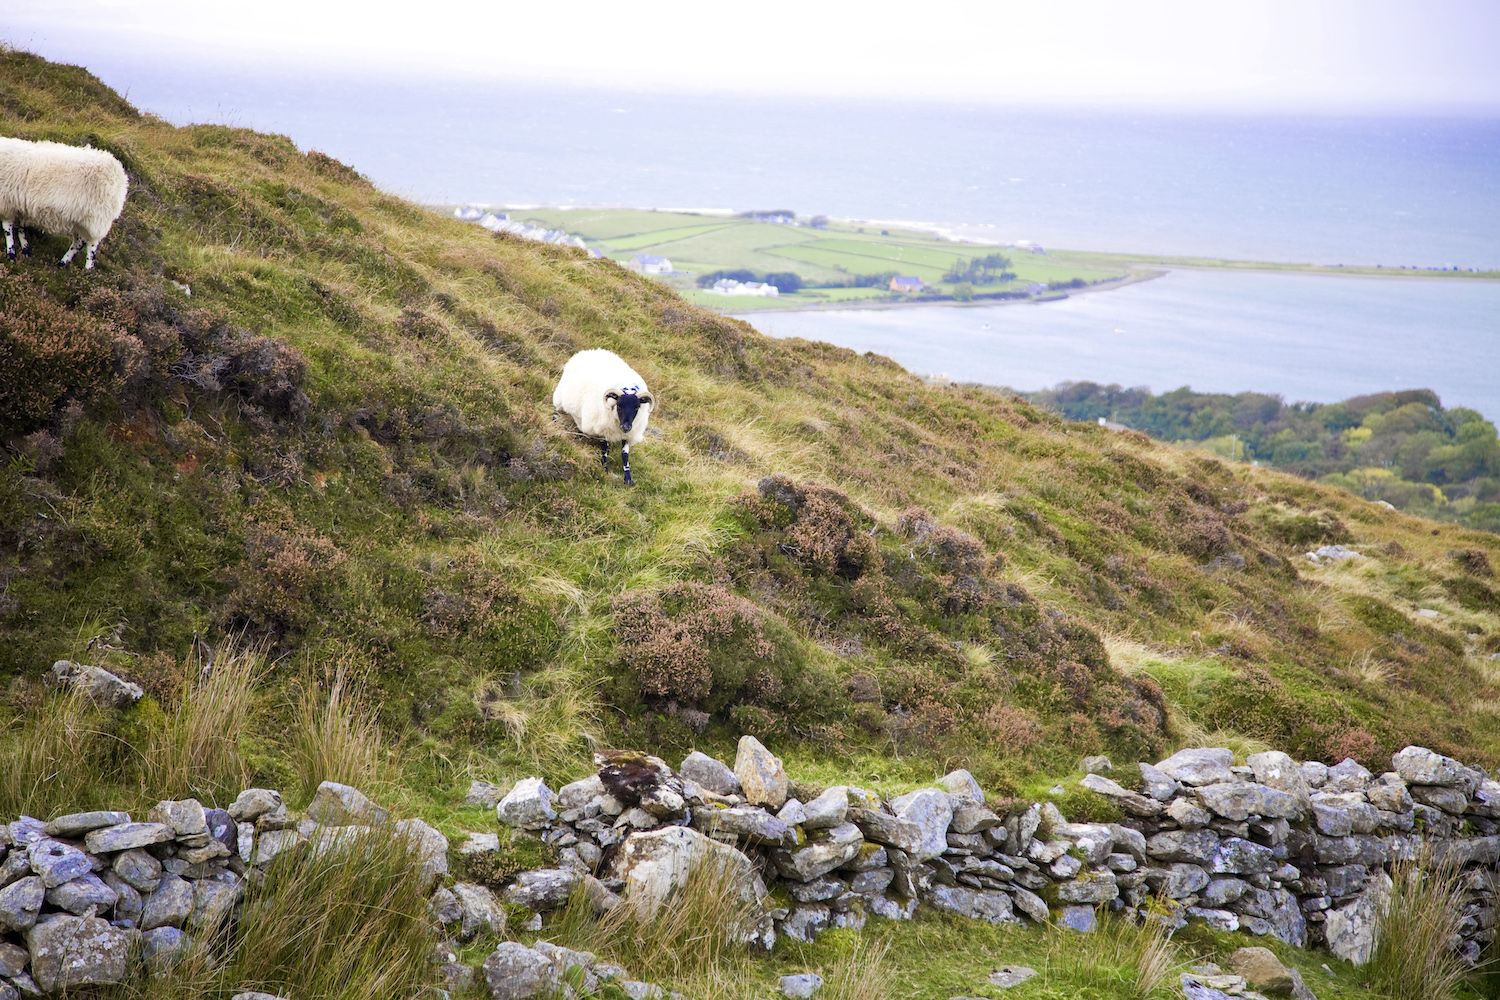 A history in Ireland's dry stone walls